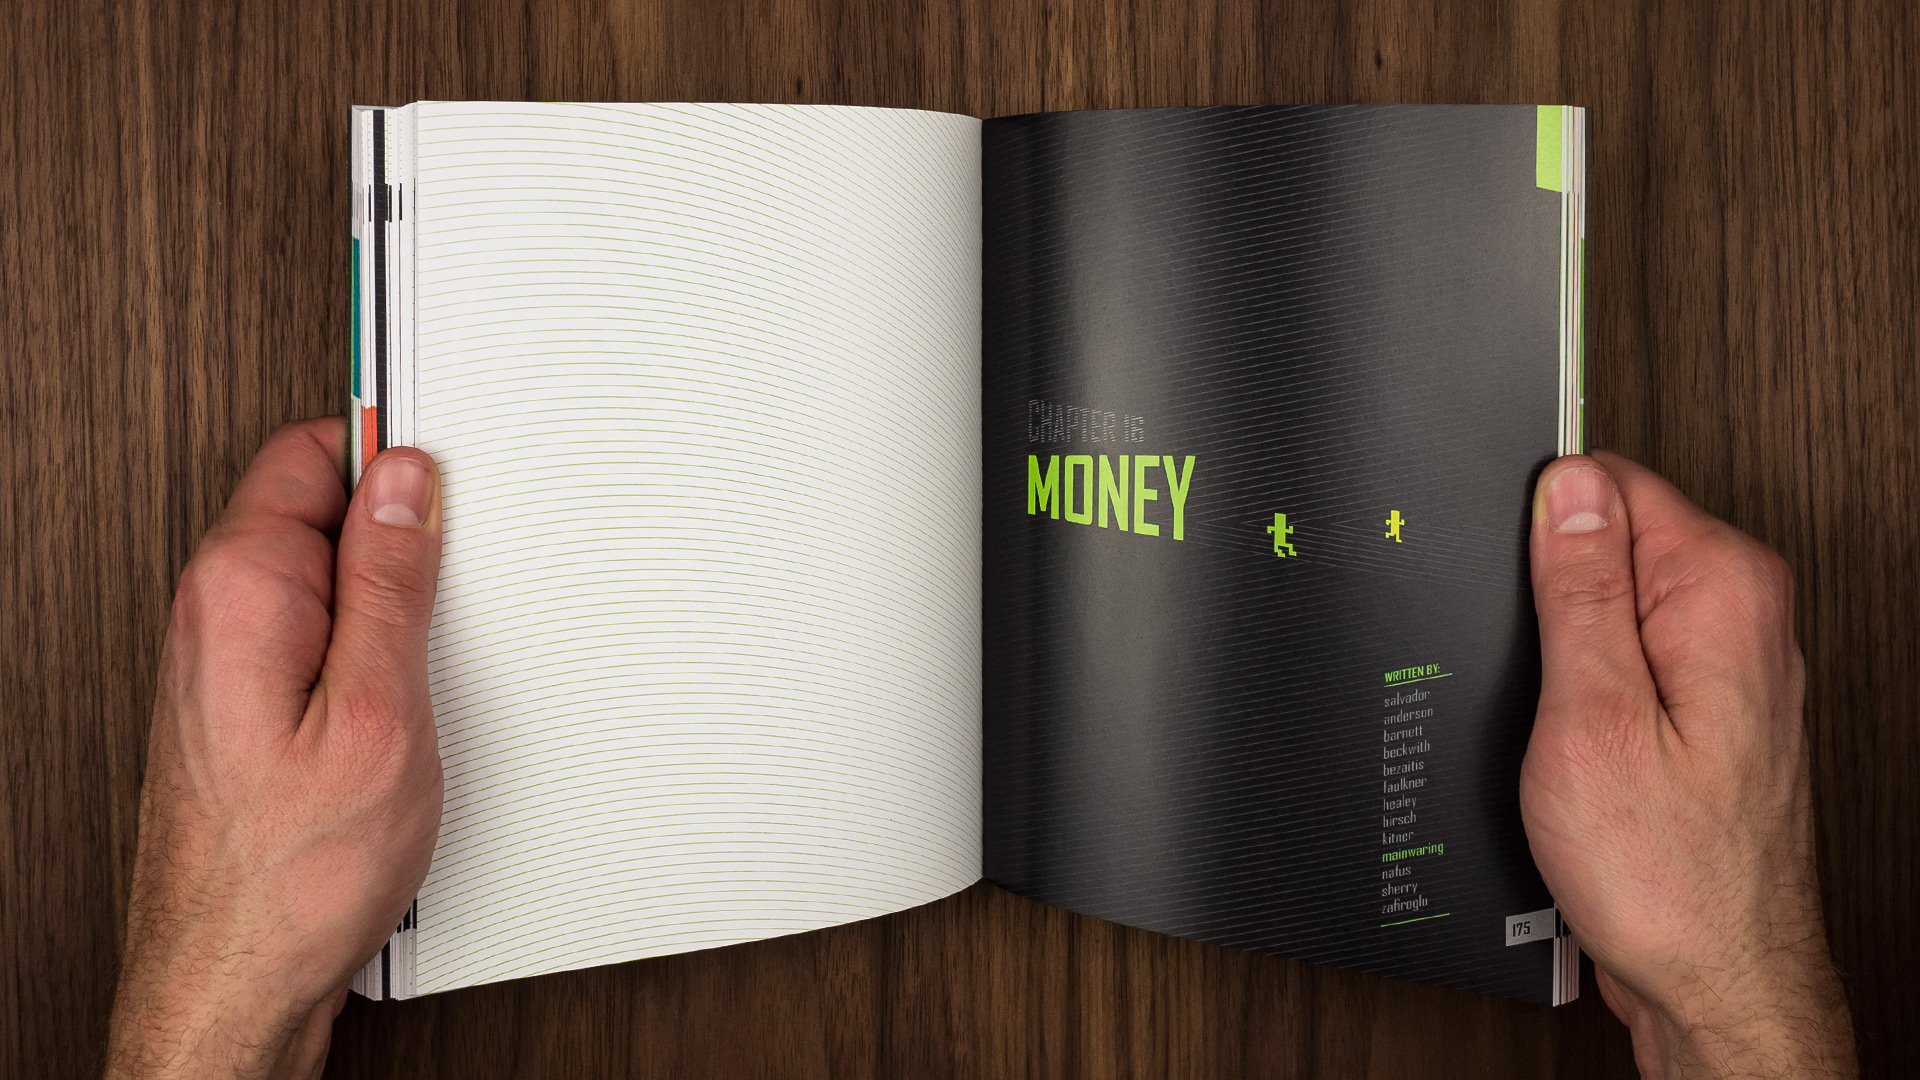 Spread from Intel's Radical Flux book design created by Incubate Design